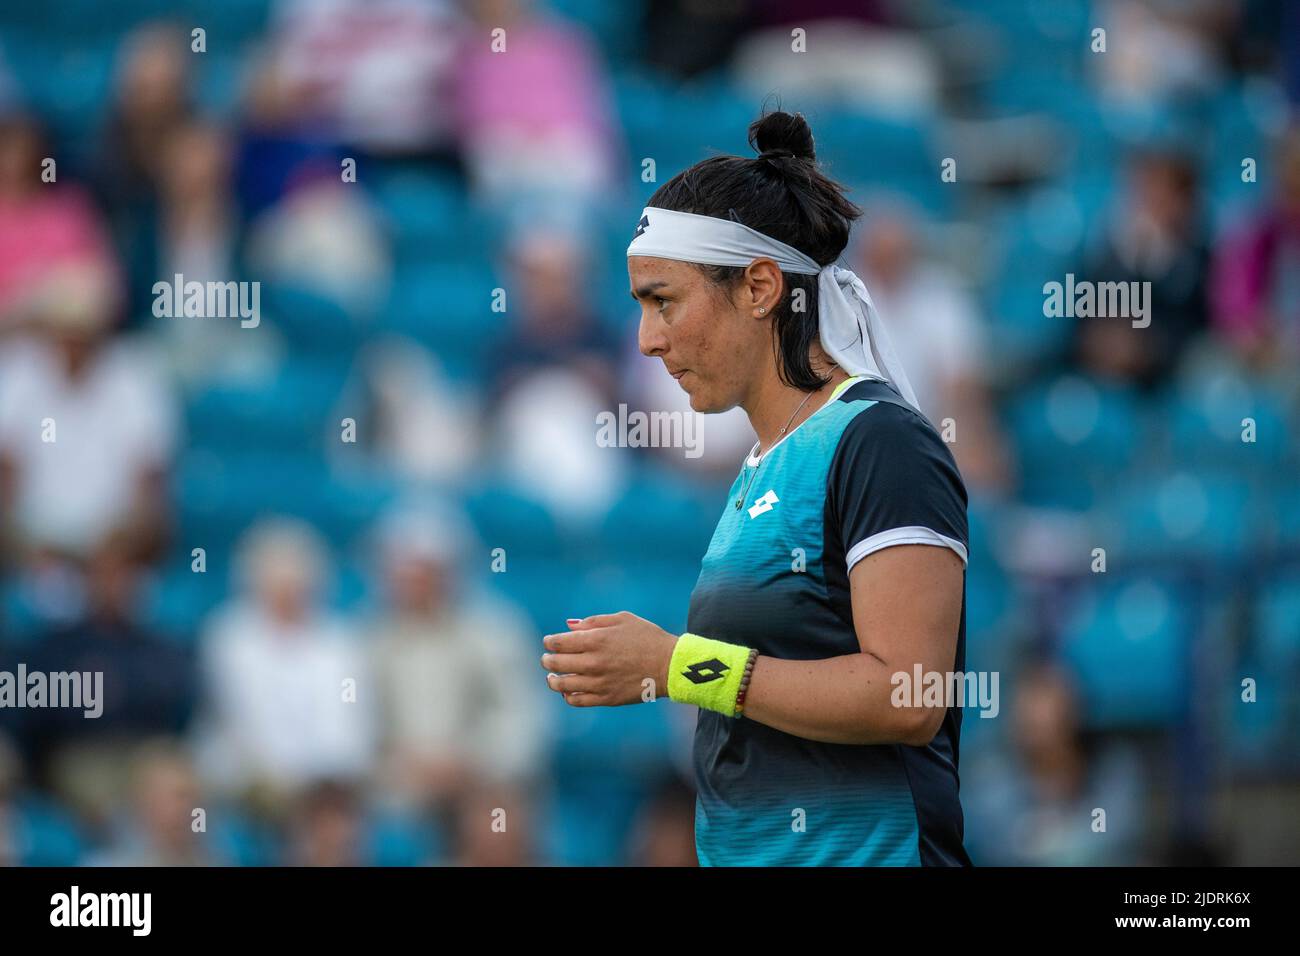 EASTBOURNE, ENGLAND - JUNE 22: Ons Jabeur of Tunisia plaalonsie  Serena Williams against Shuko Aoyama of Japan and Hao-Ching Chan of Chinese Taipei on Day Five of Rothesay International Eastbourne at Devonshire Park on June 22, 2022 in Eastbourne, England. (Photo by Sebastian Frej) Credit: Sebo47/Alamy Live News Stock Photo